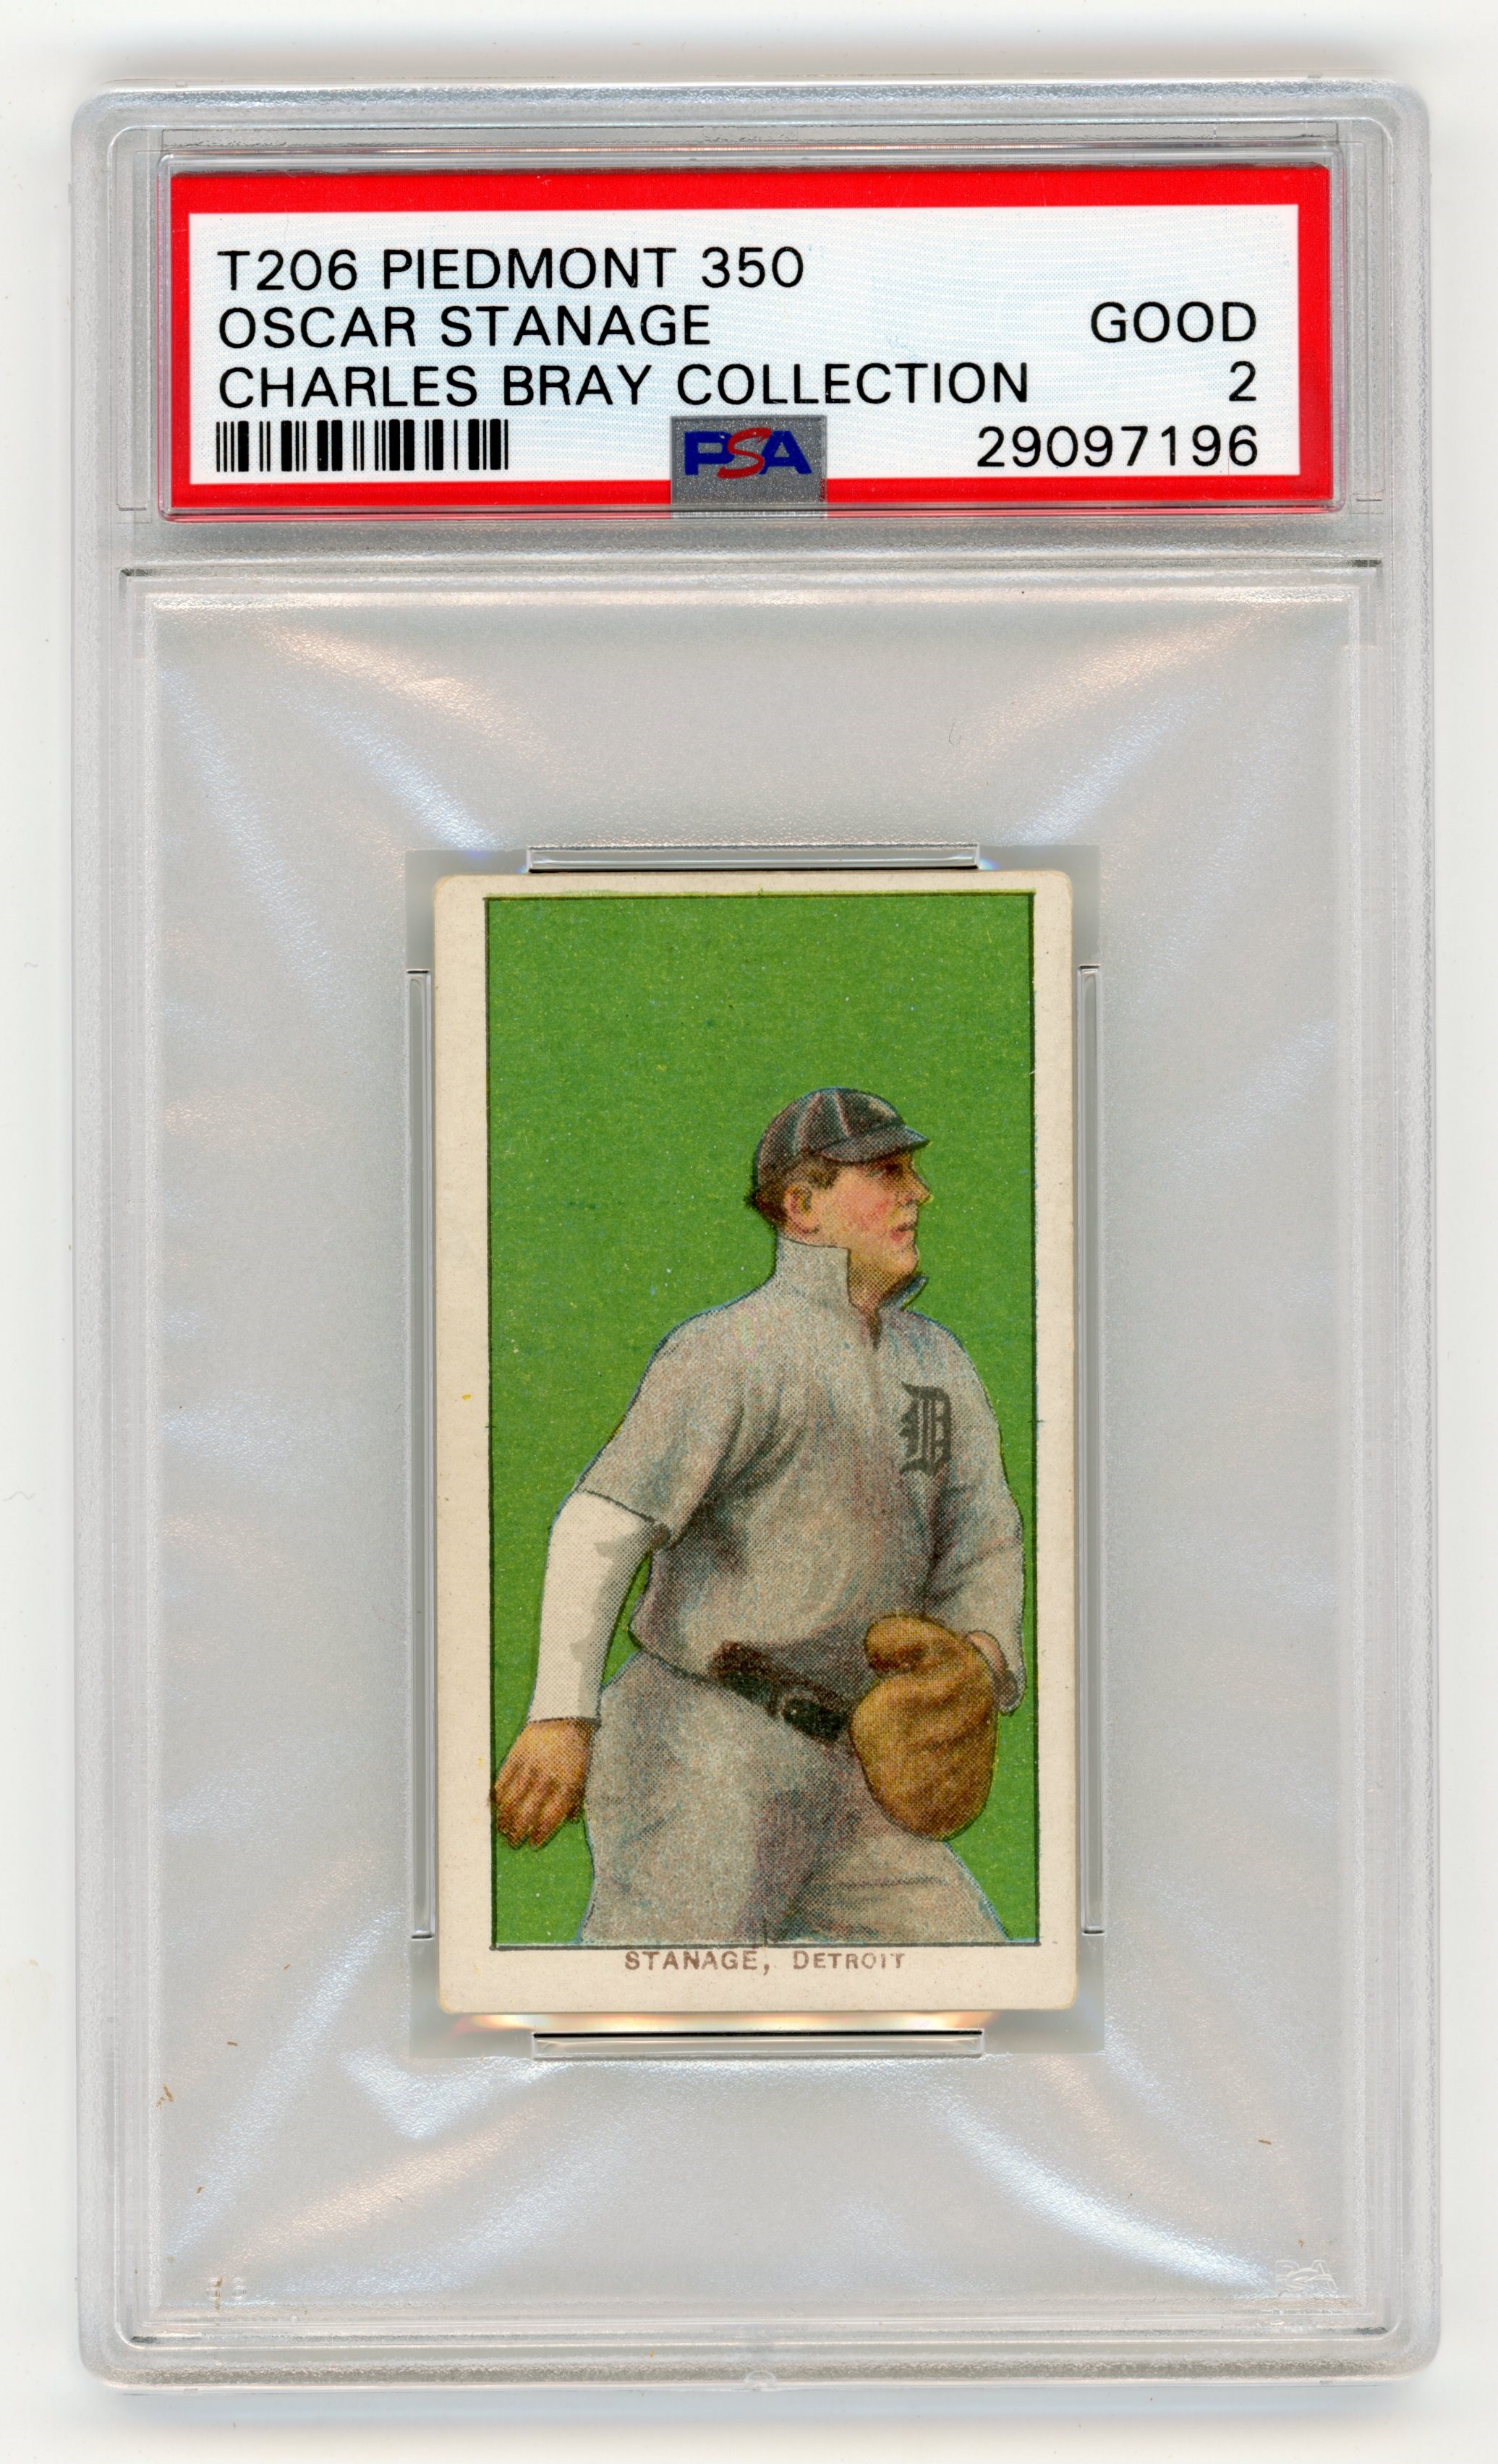 Baseball and Trading Cards - T206 Piedmont 350 Oscar Stanage PSA GOOD 2 From the Charles Bray Collection.